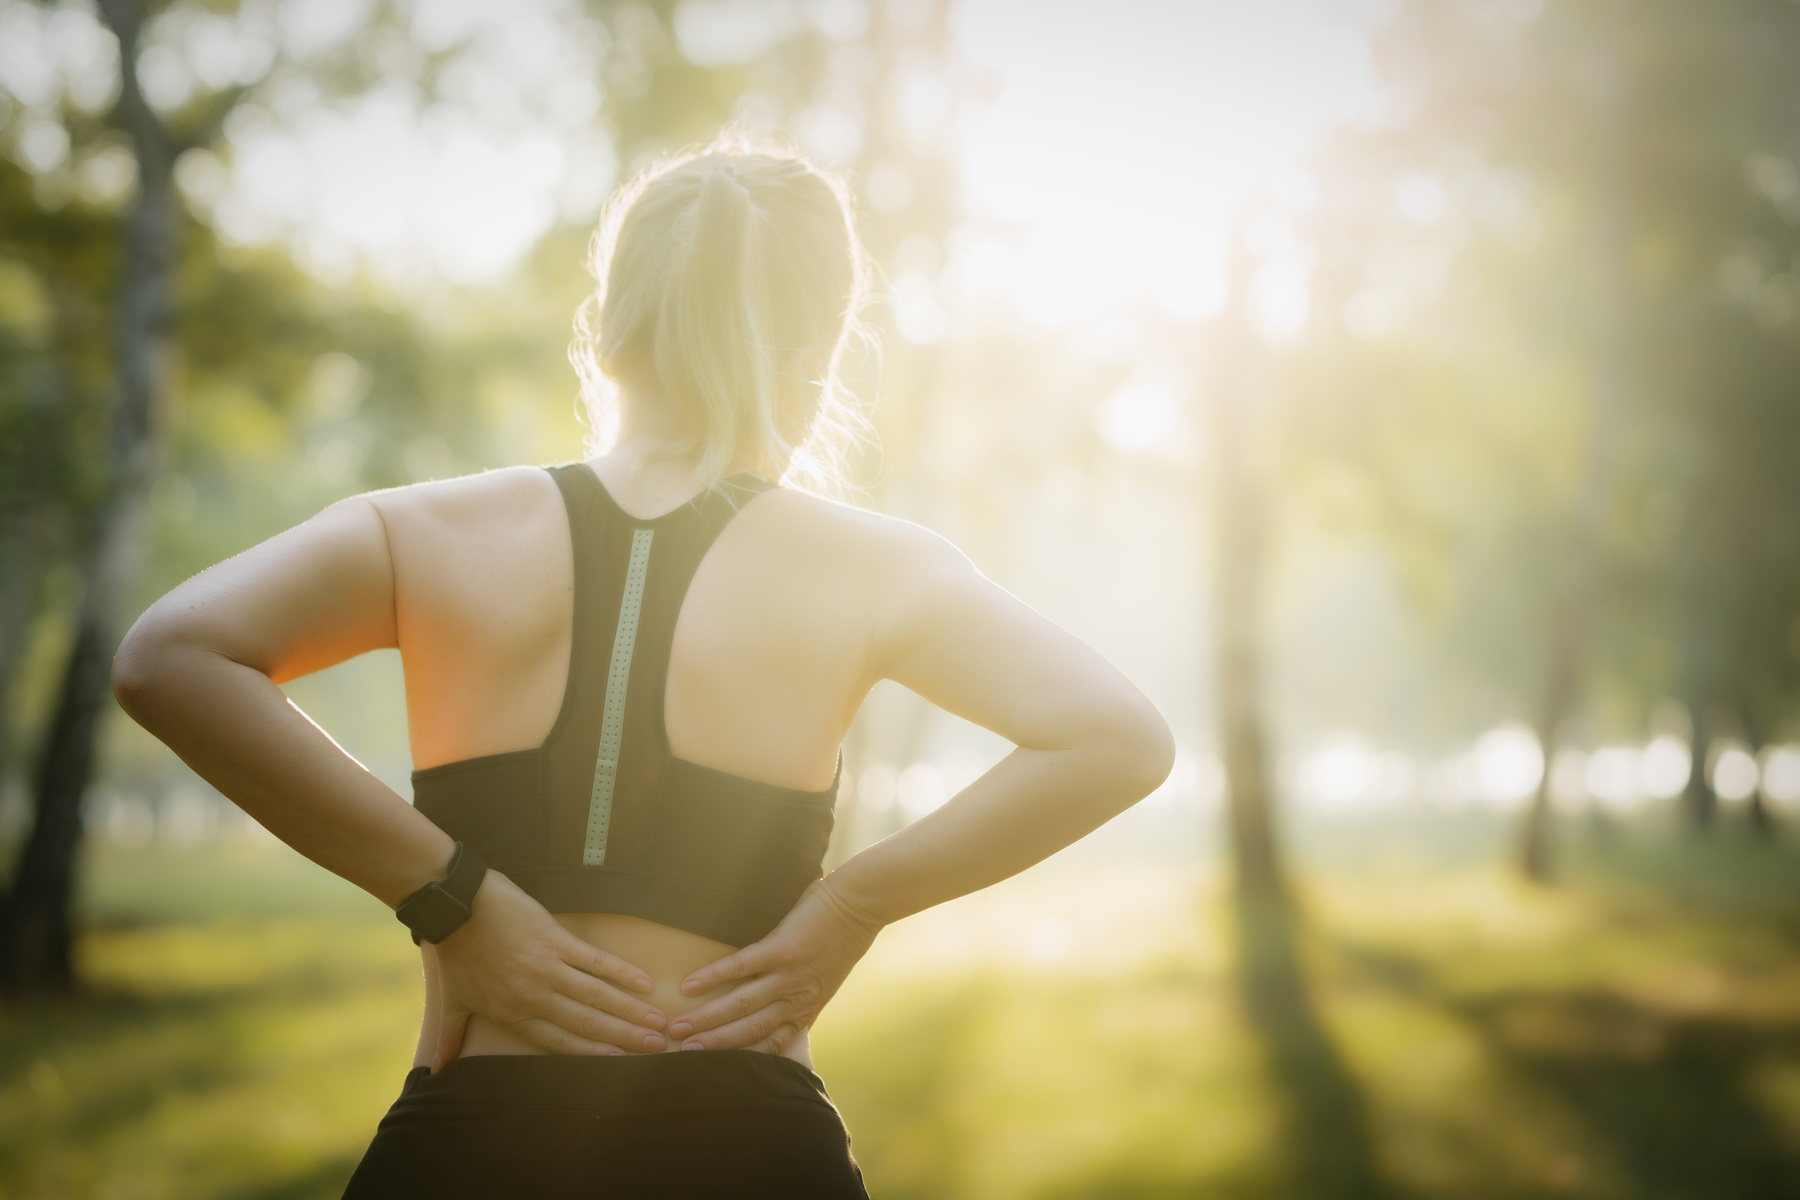 Back Pain When Breathing: Causes and Treatments